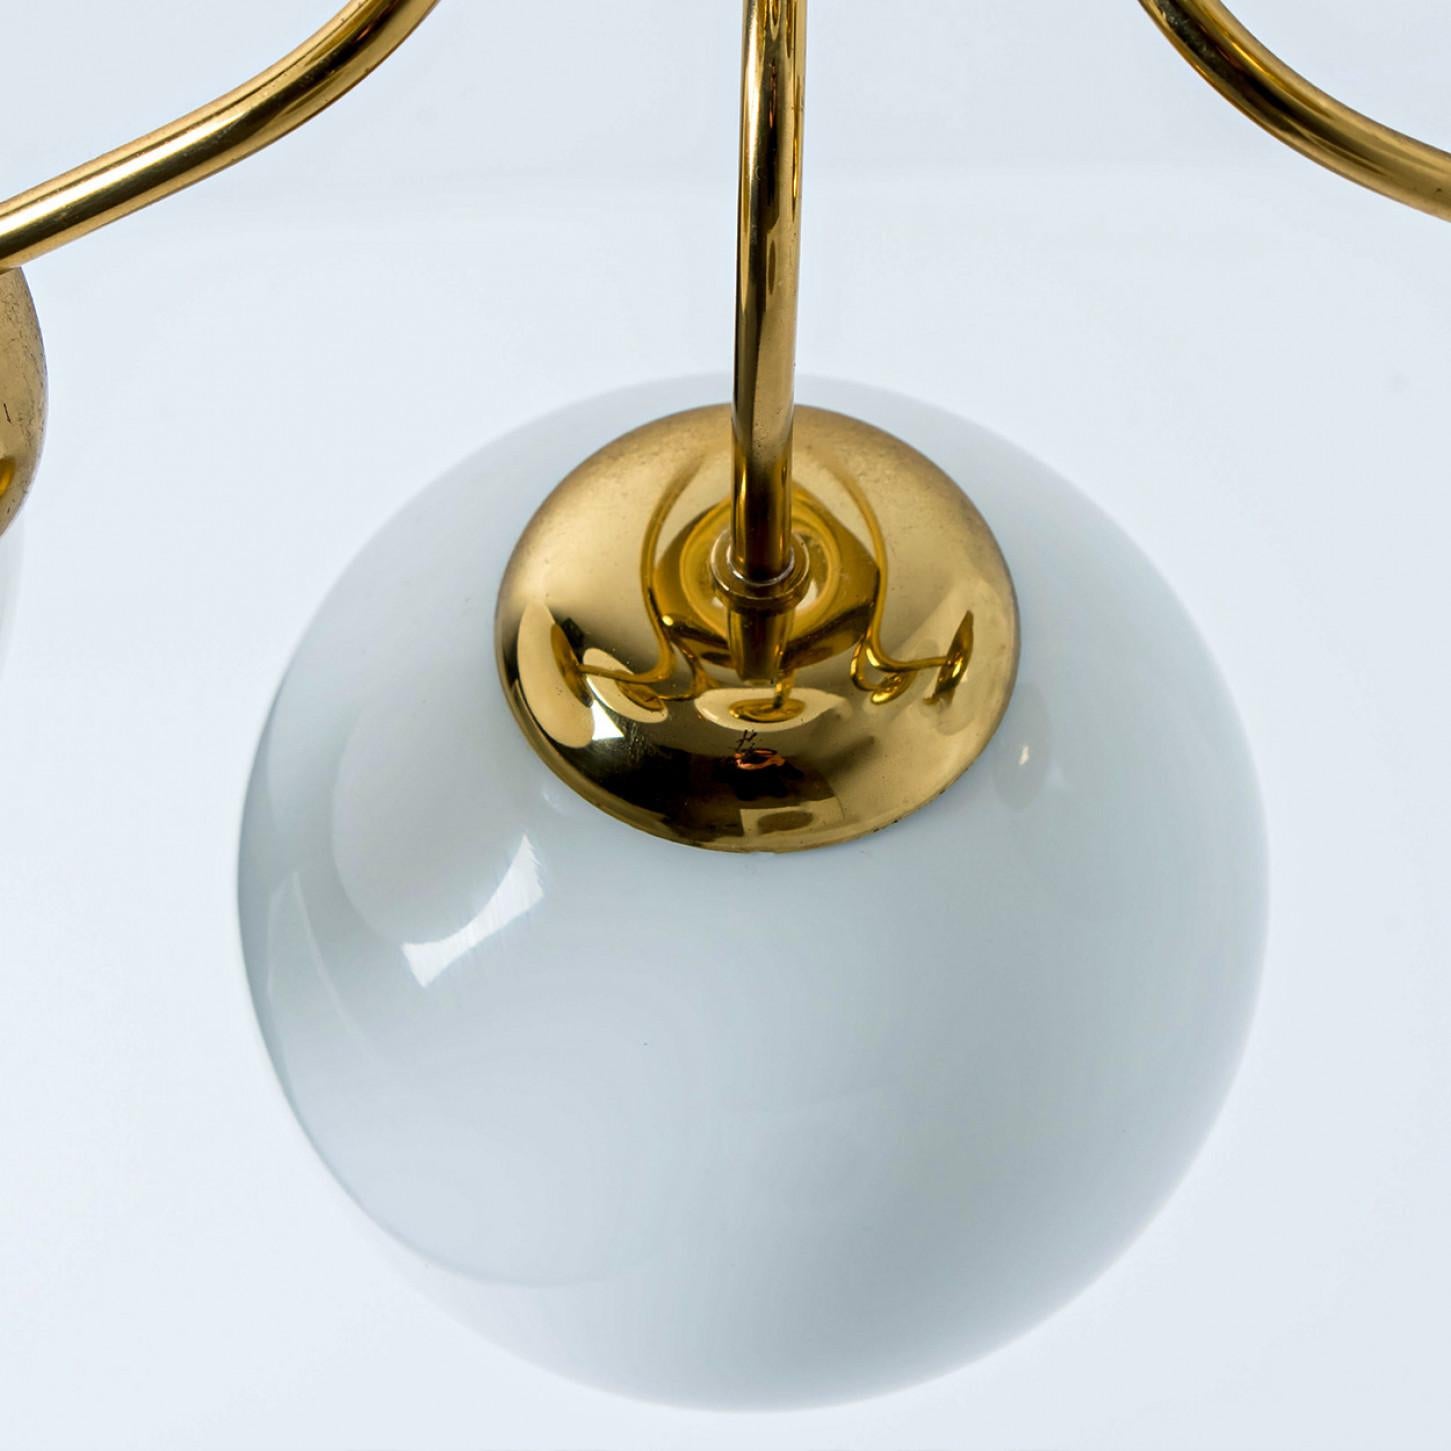 A wonderful round brass chandelier, circa 1970, made by Glashütte Limburg, Germany.
With hand-blown white glass on a brass base and a curve-like structure in brass. Illuminates beautifully.

Dimensions:
Diameter: 21.65